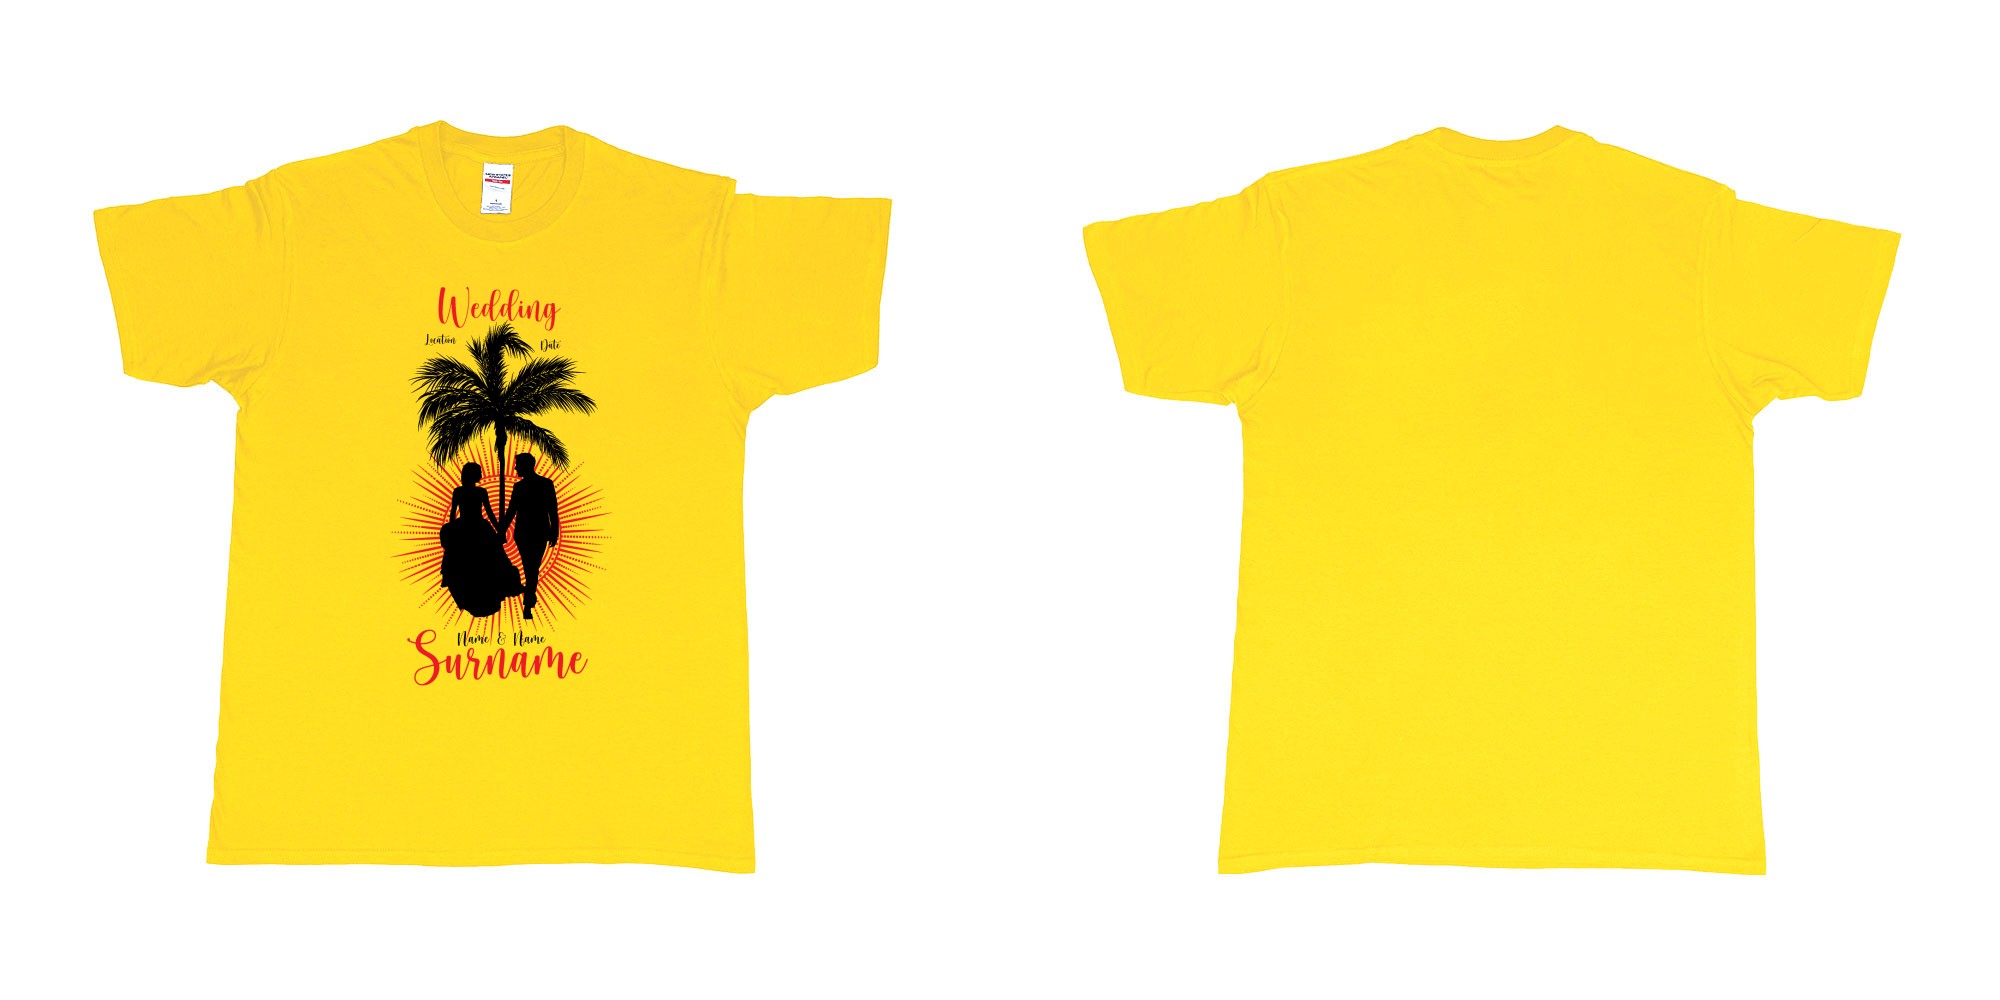 Custom tshirt design wedding palm sun bali in fabric color daisy choice your own text made in Bali by The Pirate Way